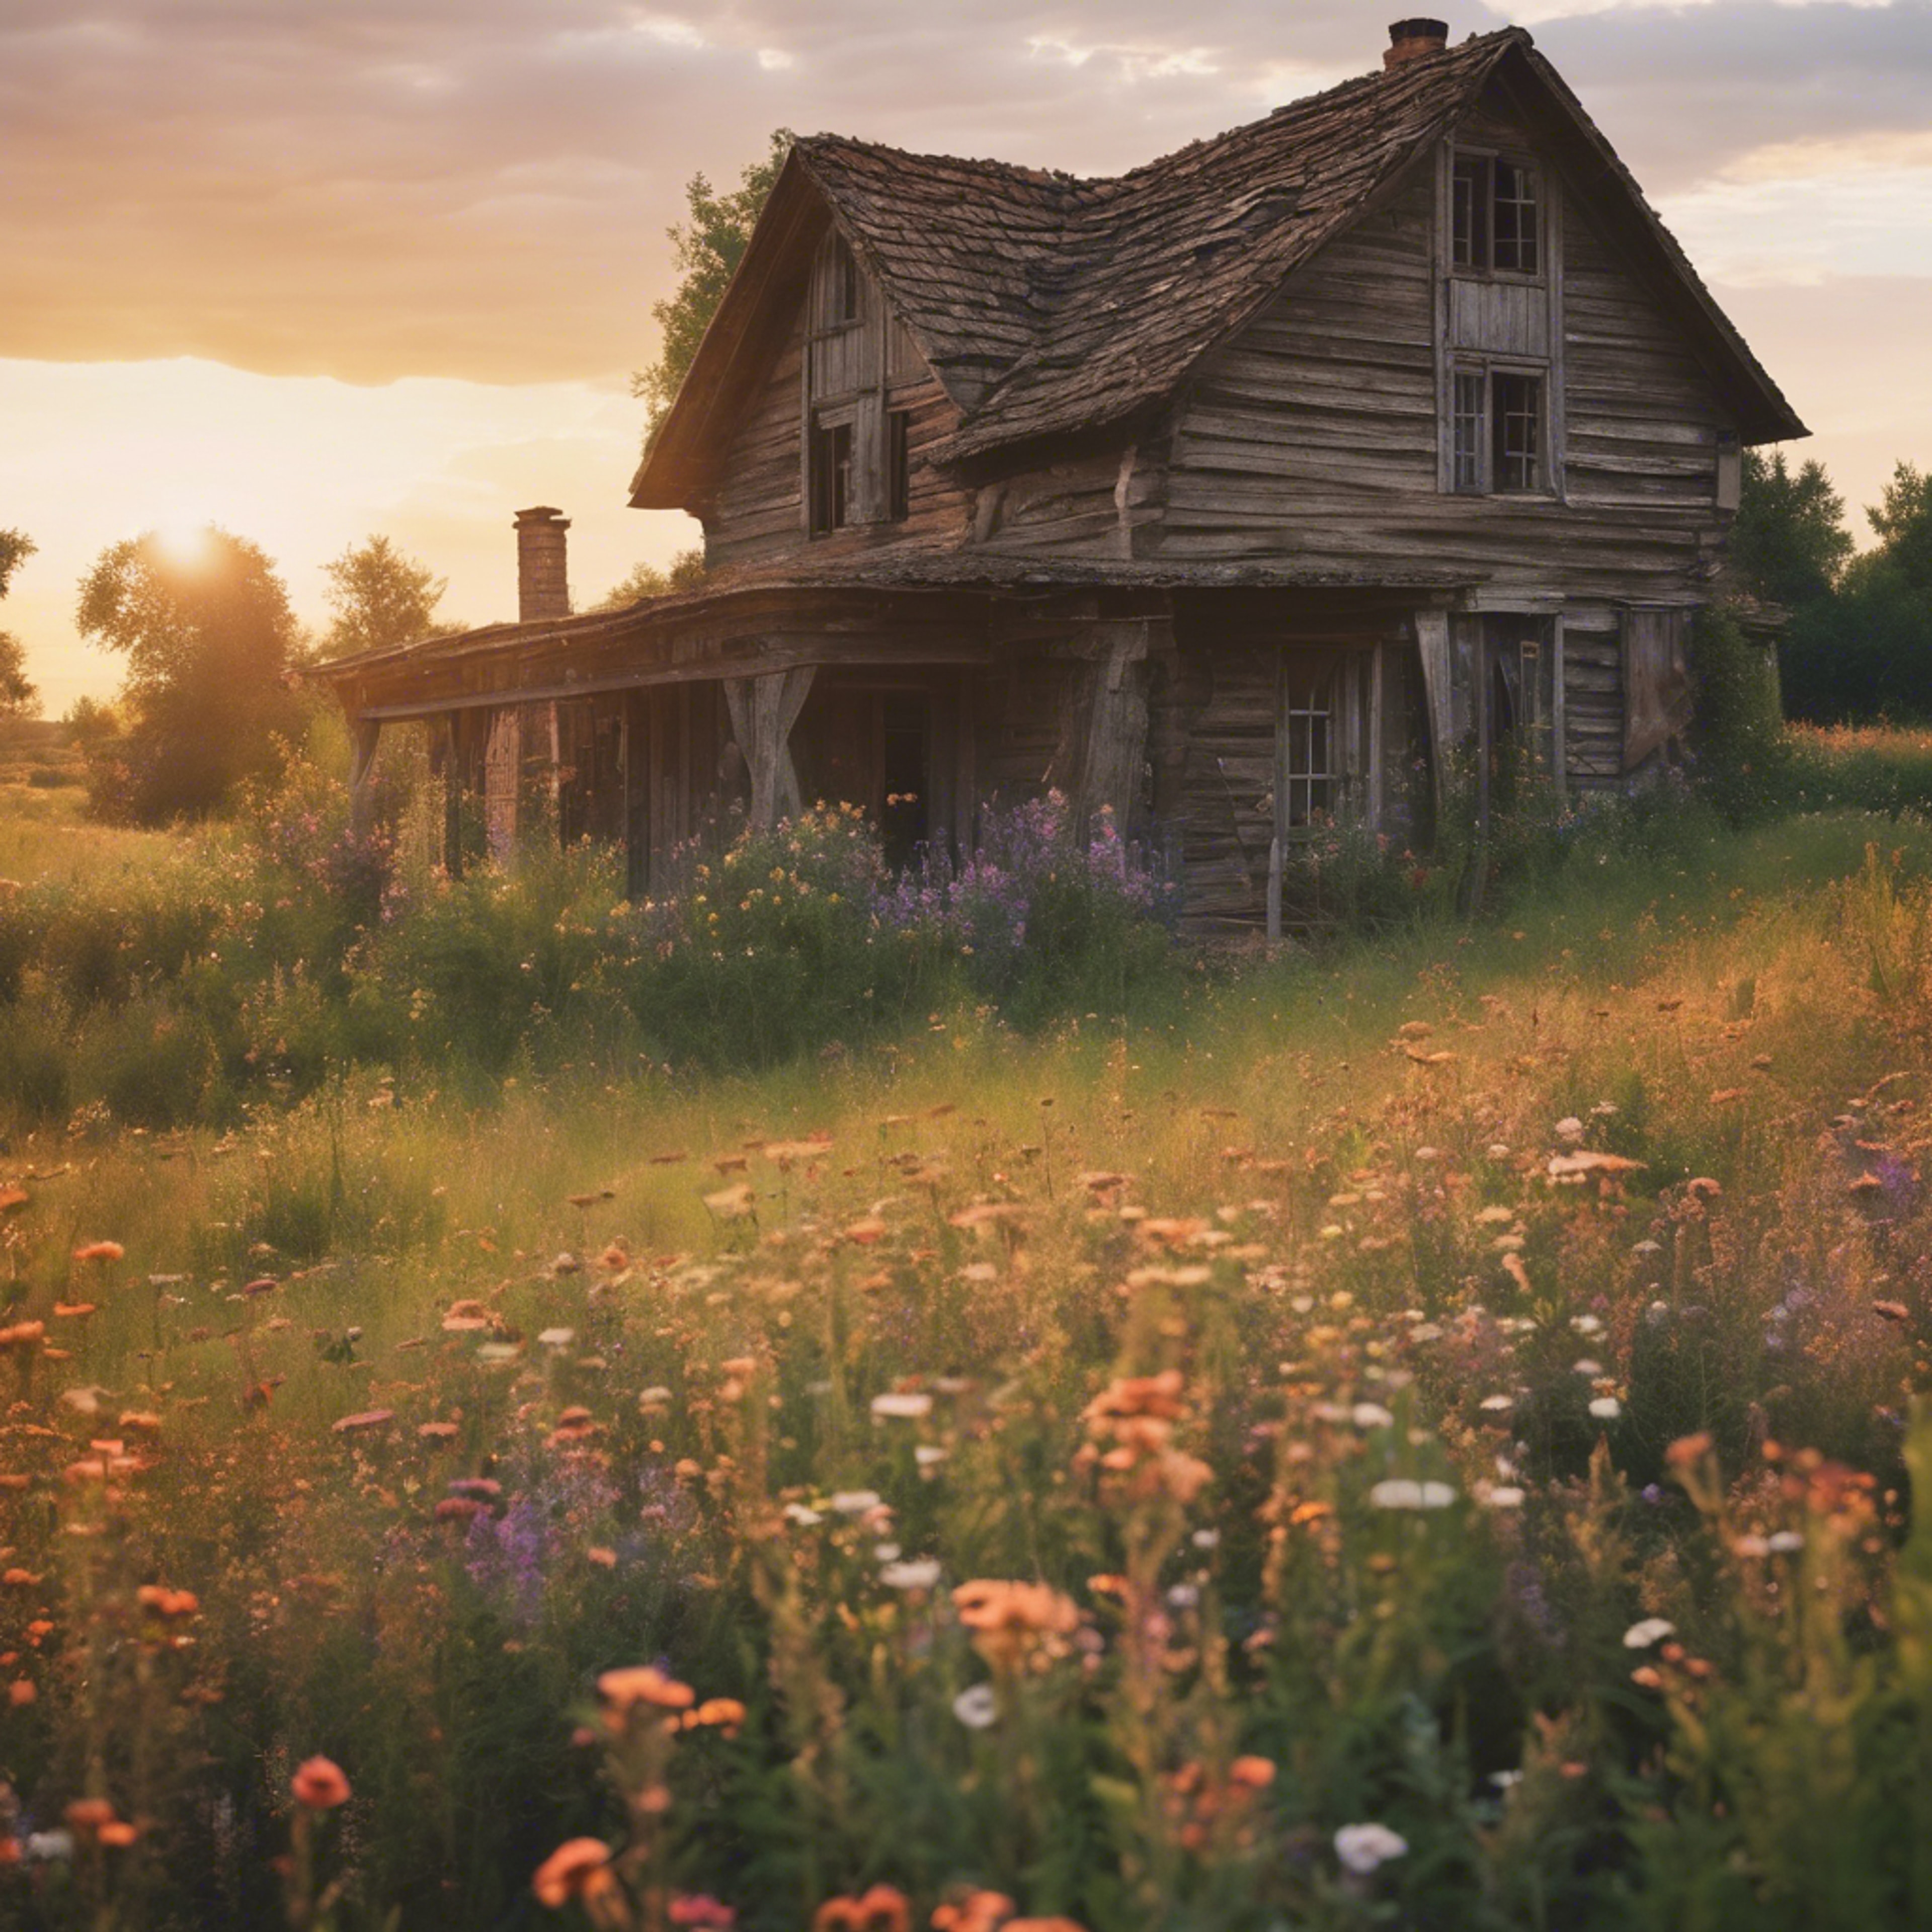 An old, rustic farmhouse nestled in a peaceful countryside filled with wildflowers under the warm evening sky evoking a sense of peaceful nostalgia.壁紙[69734339127742a48dc2]